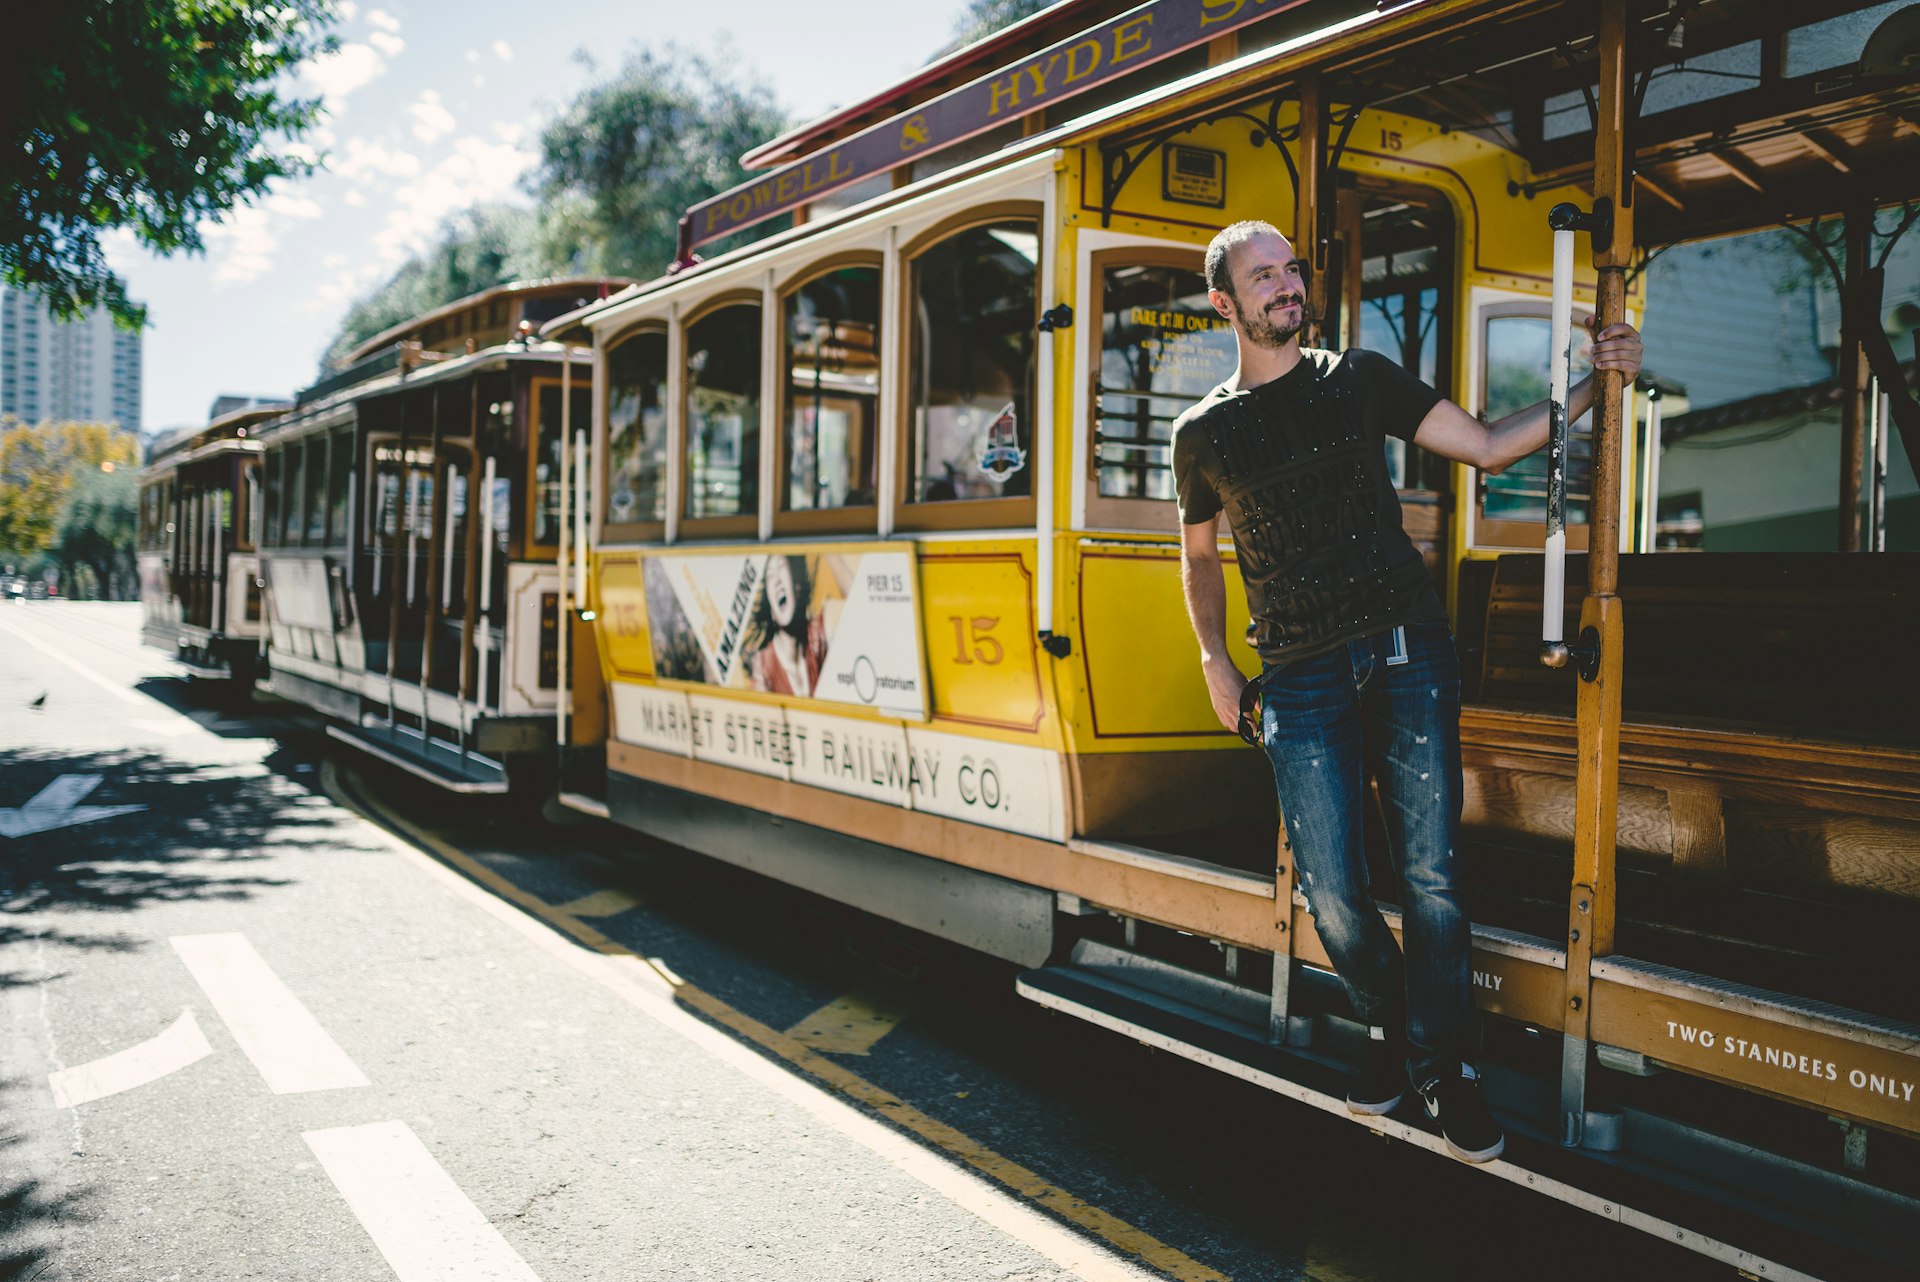 A smiling man rides a historic yellow streetcar in San Francisco during the daytime